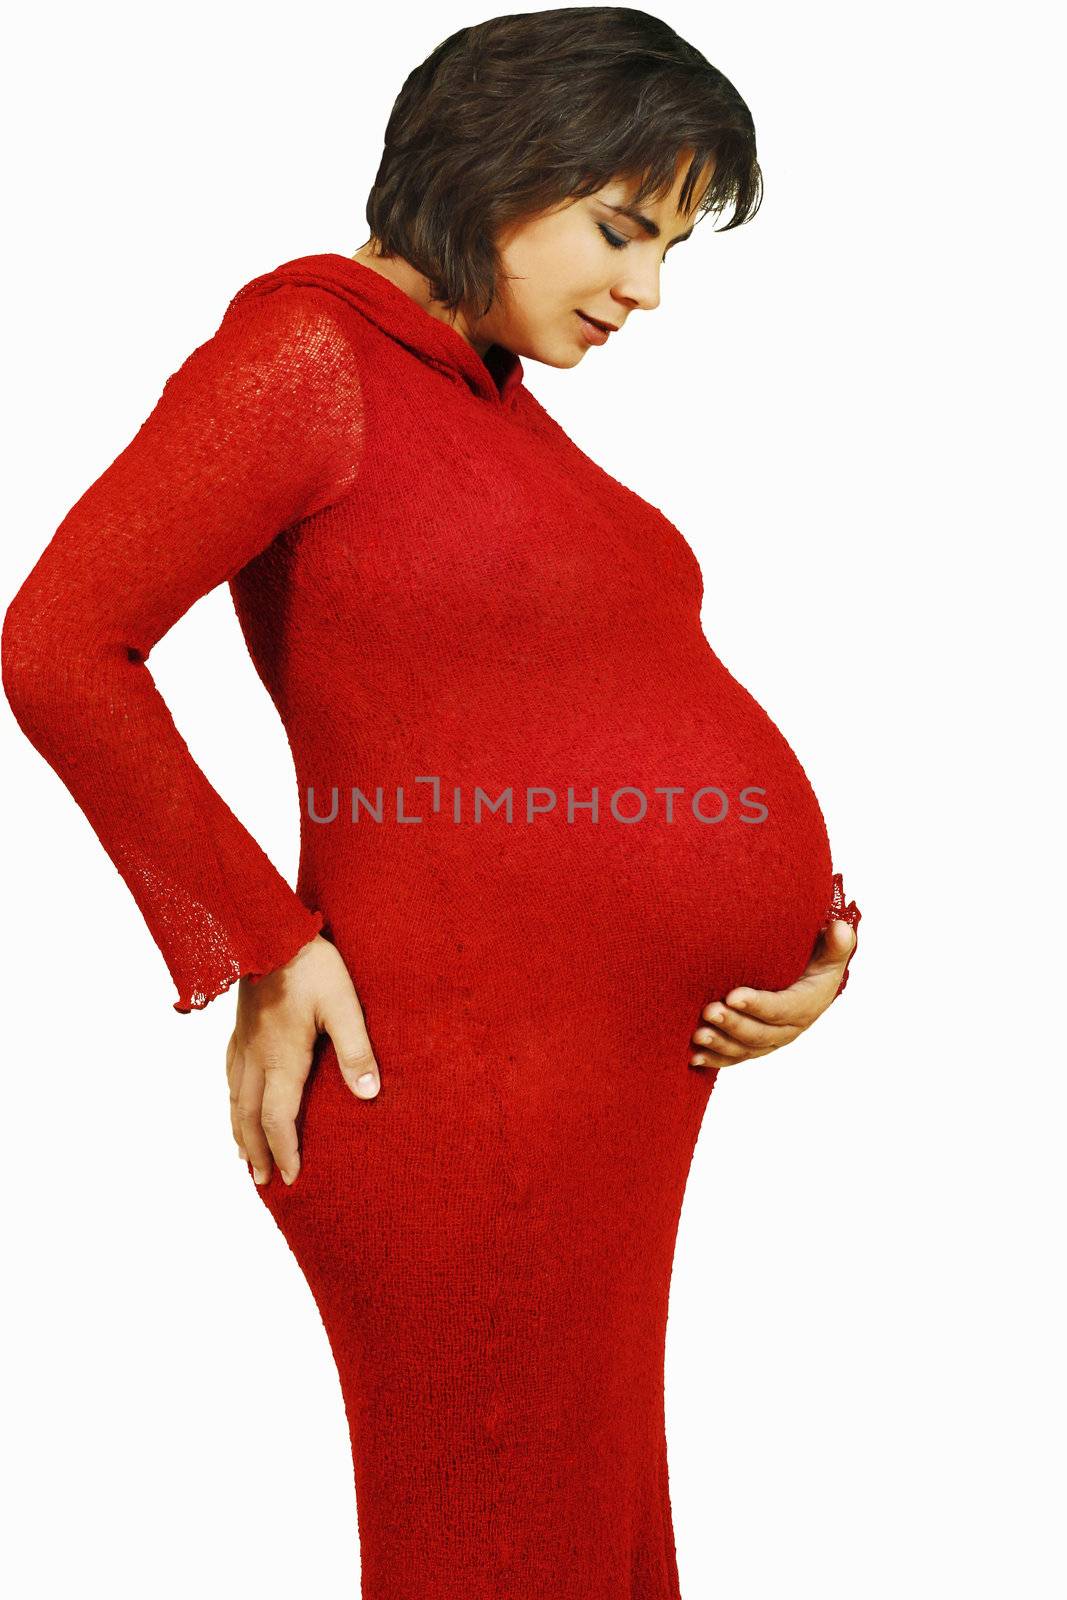 Young mother to be in red stretch knit dress
(contrast added)